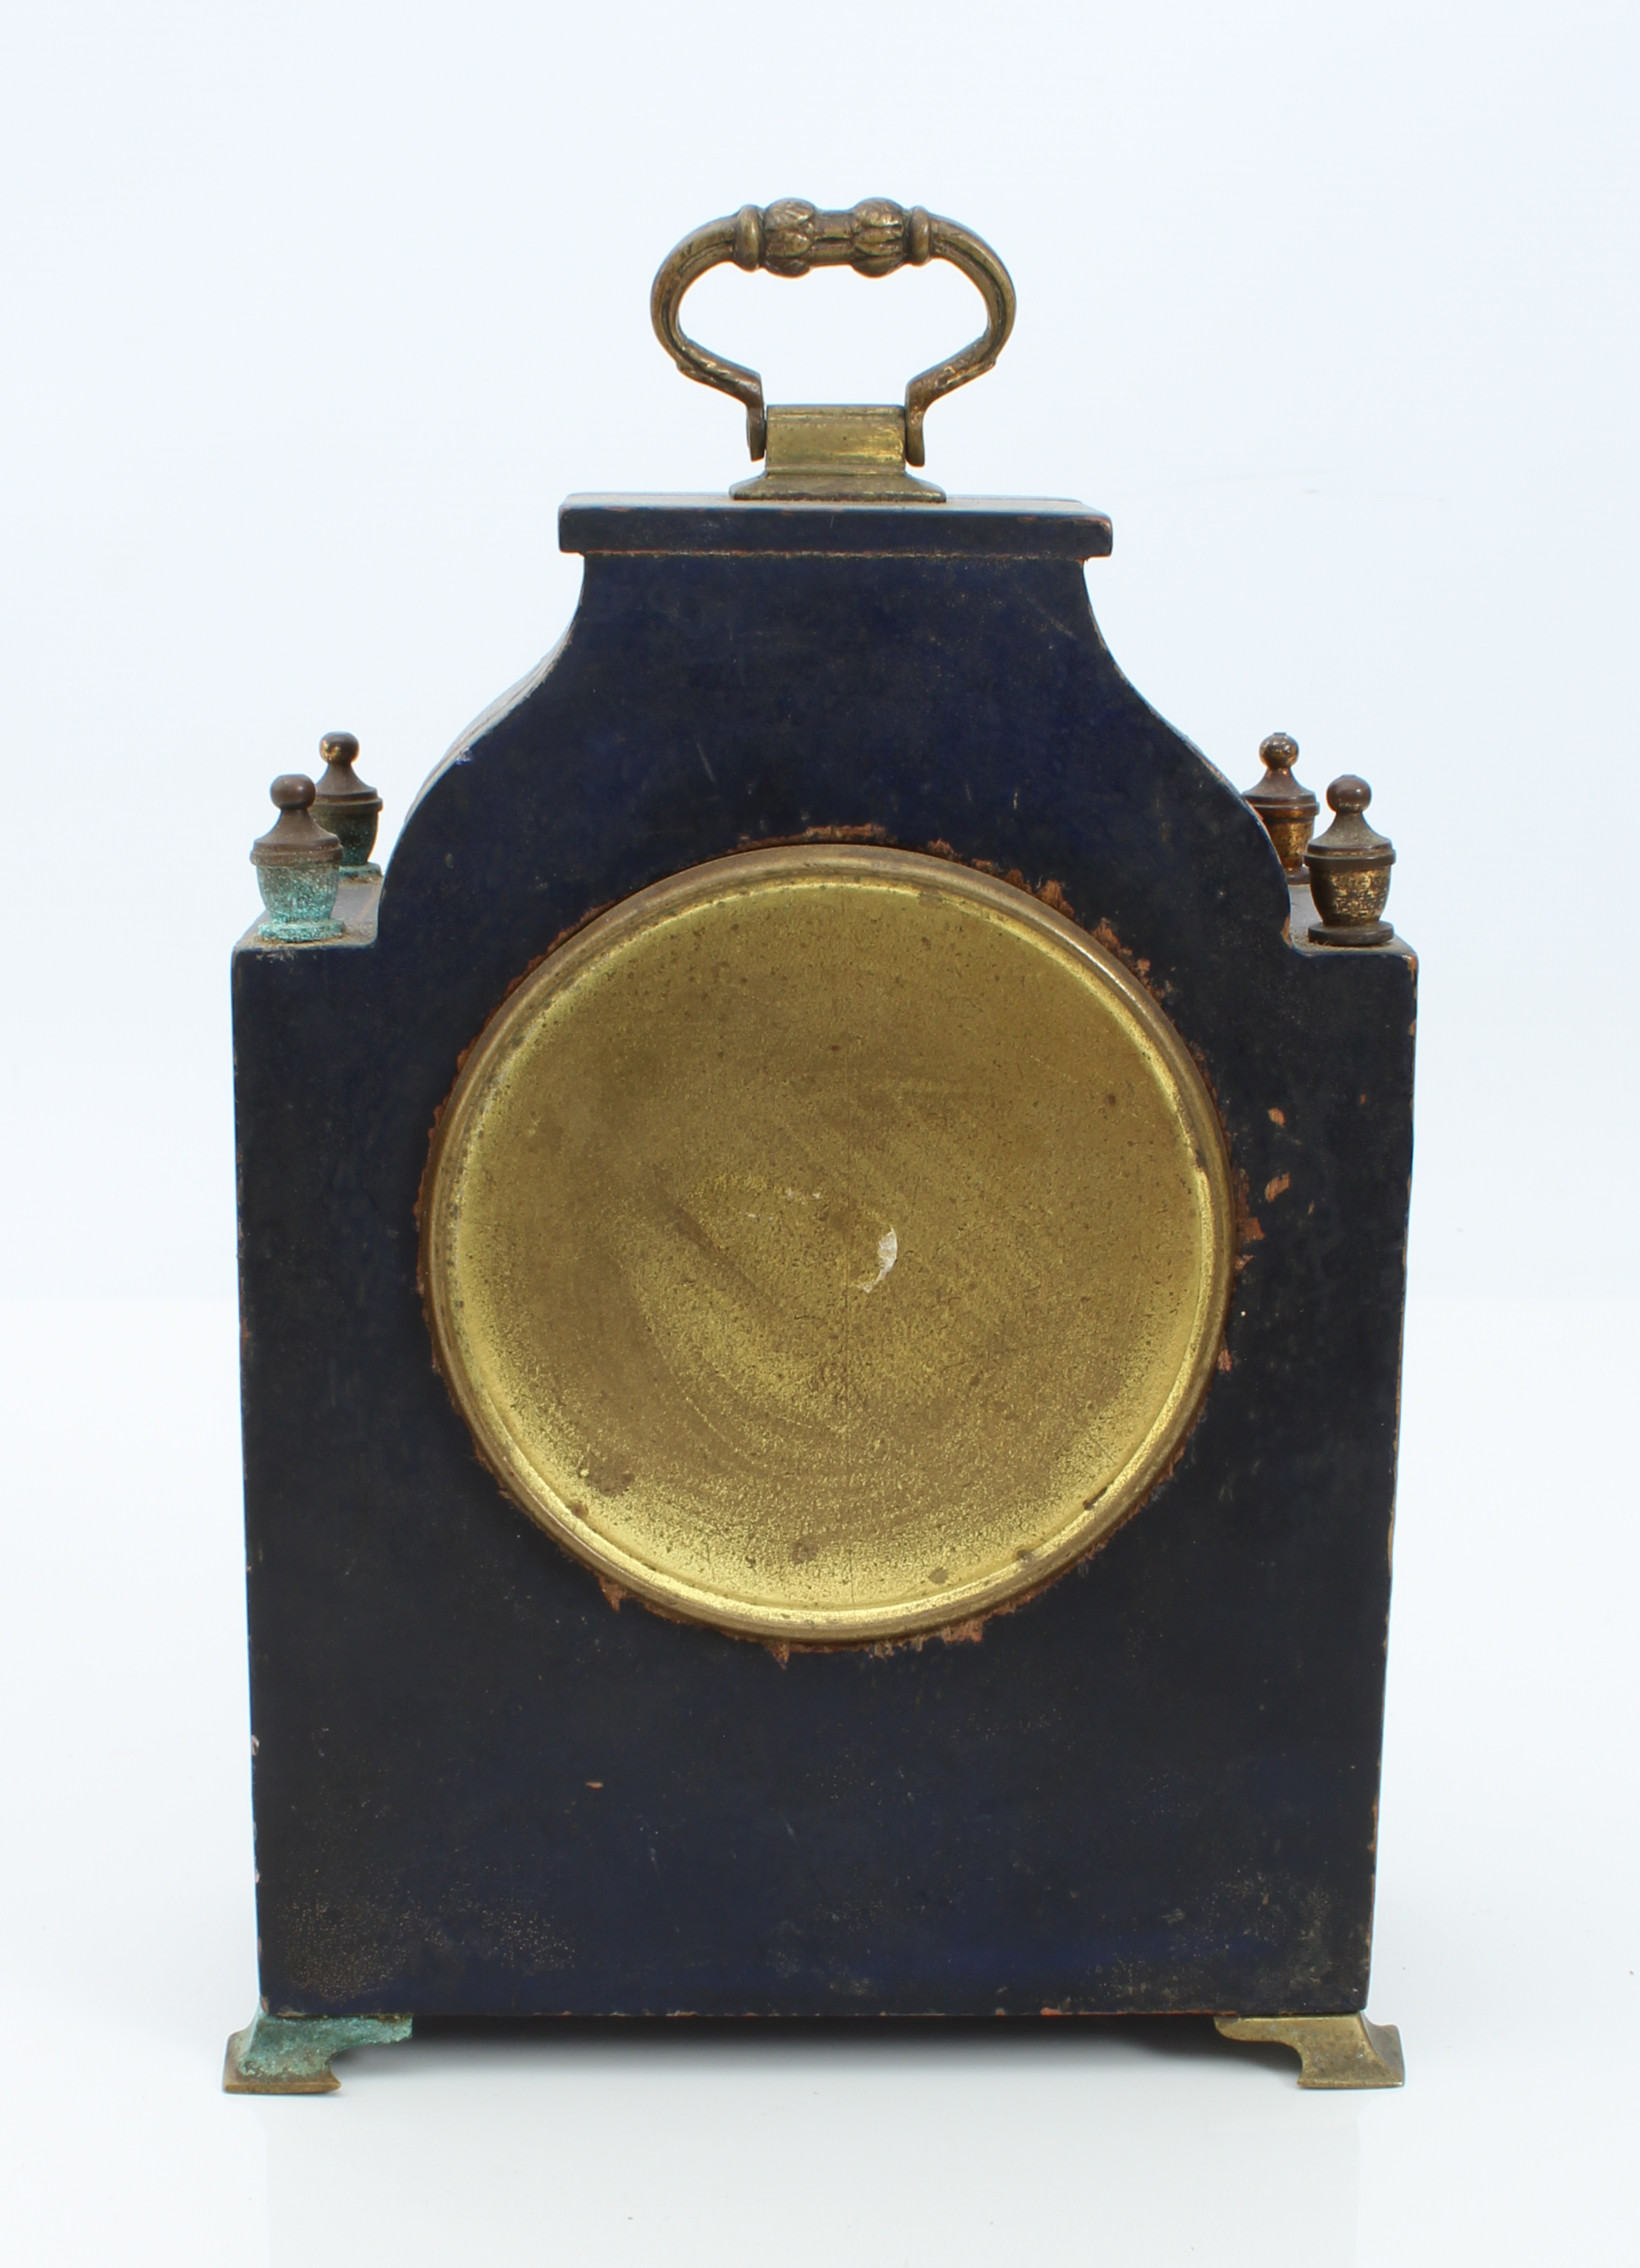 A brass-mounted desk or mantel clock in the Chinoiserie style - late-19th century, silvered 3¼ in - Image 4 of 10